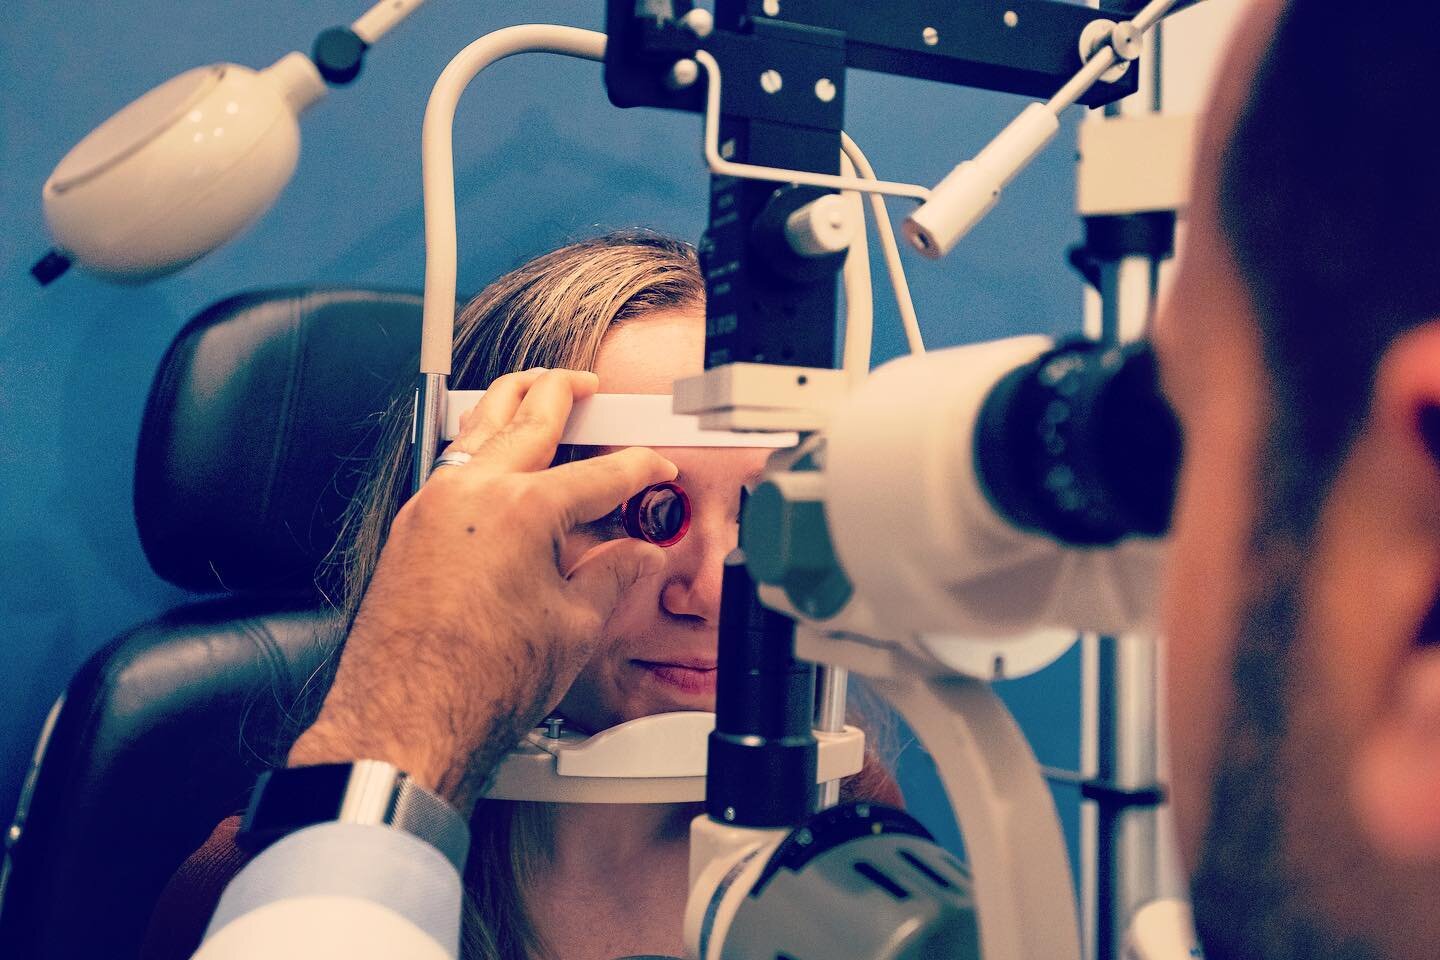 August is #NationalEyeExamMonth and it&rsquo;s almost over! Why get an annual eye exam if you have clear vision? 👁

We&rsquo;ll give you one reason (of many): To detect a sneaky criminal who can steal your sight without you knowing.

Glaucoma is a d